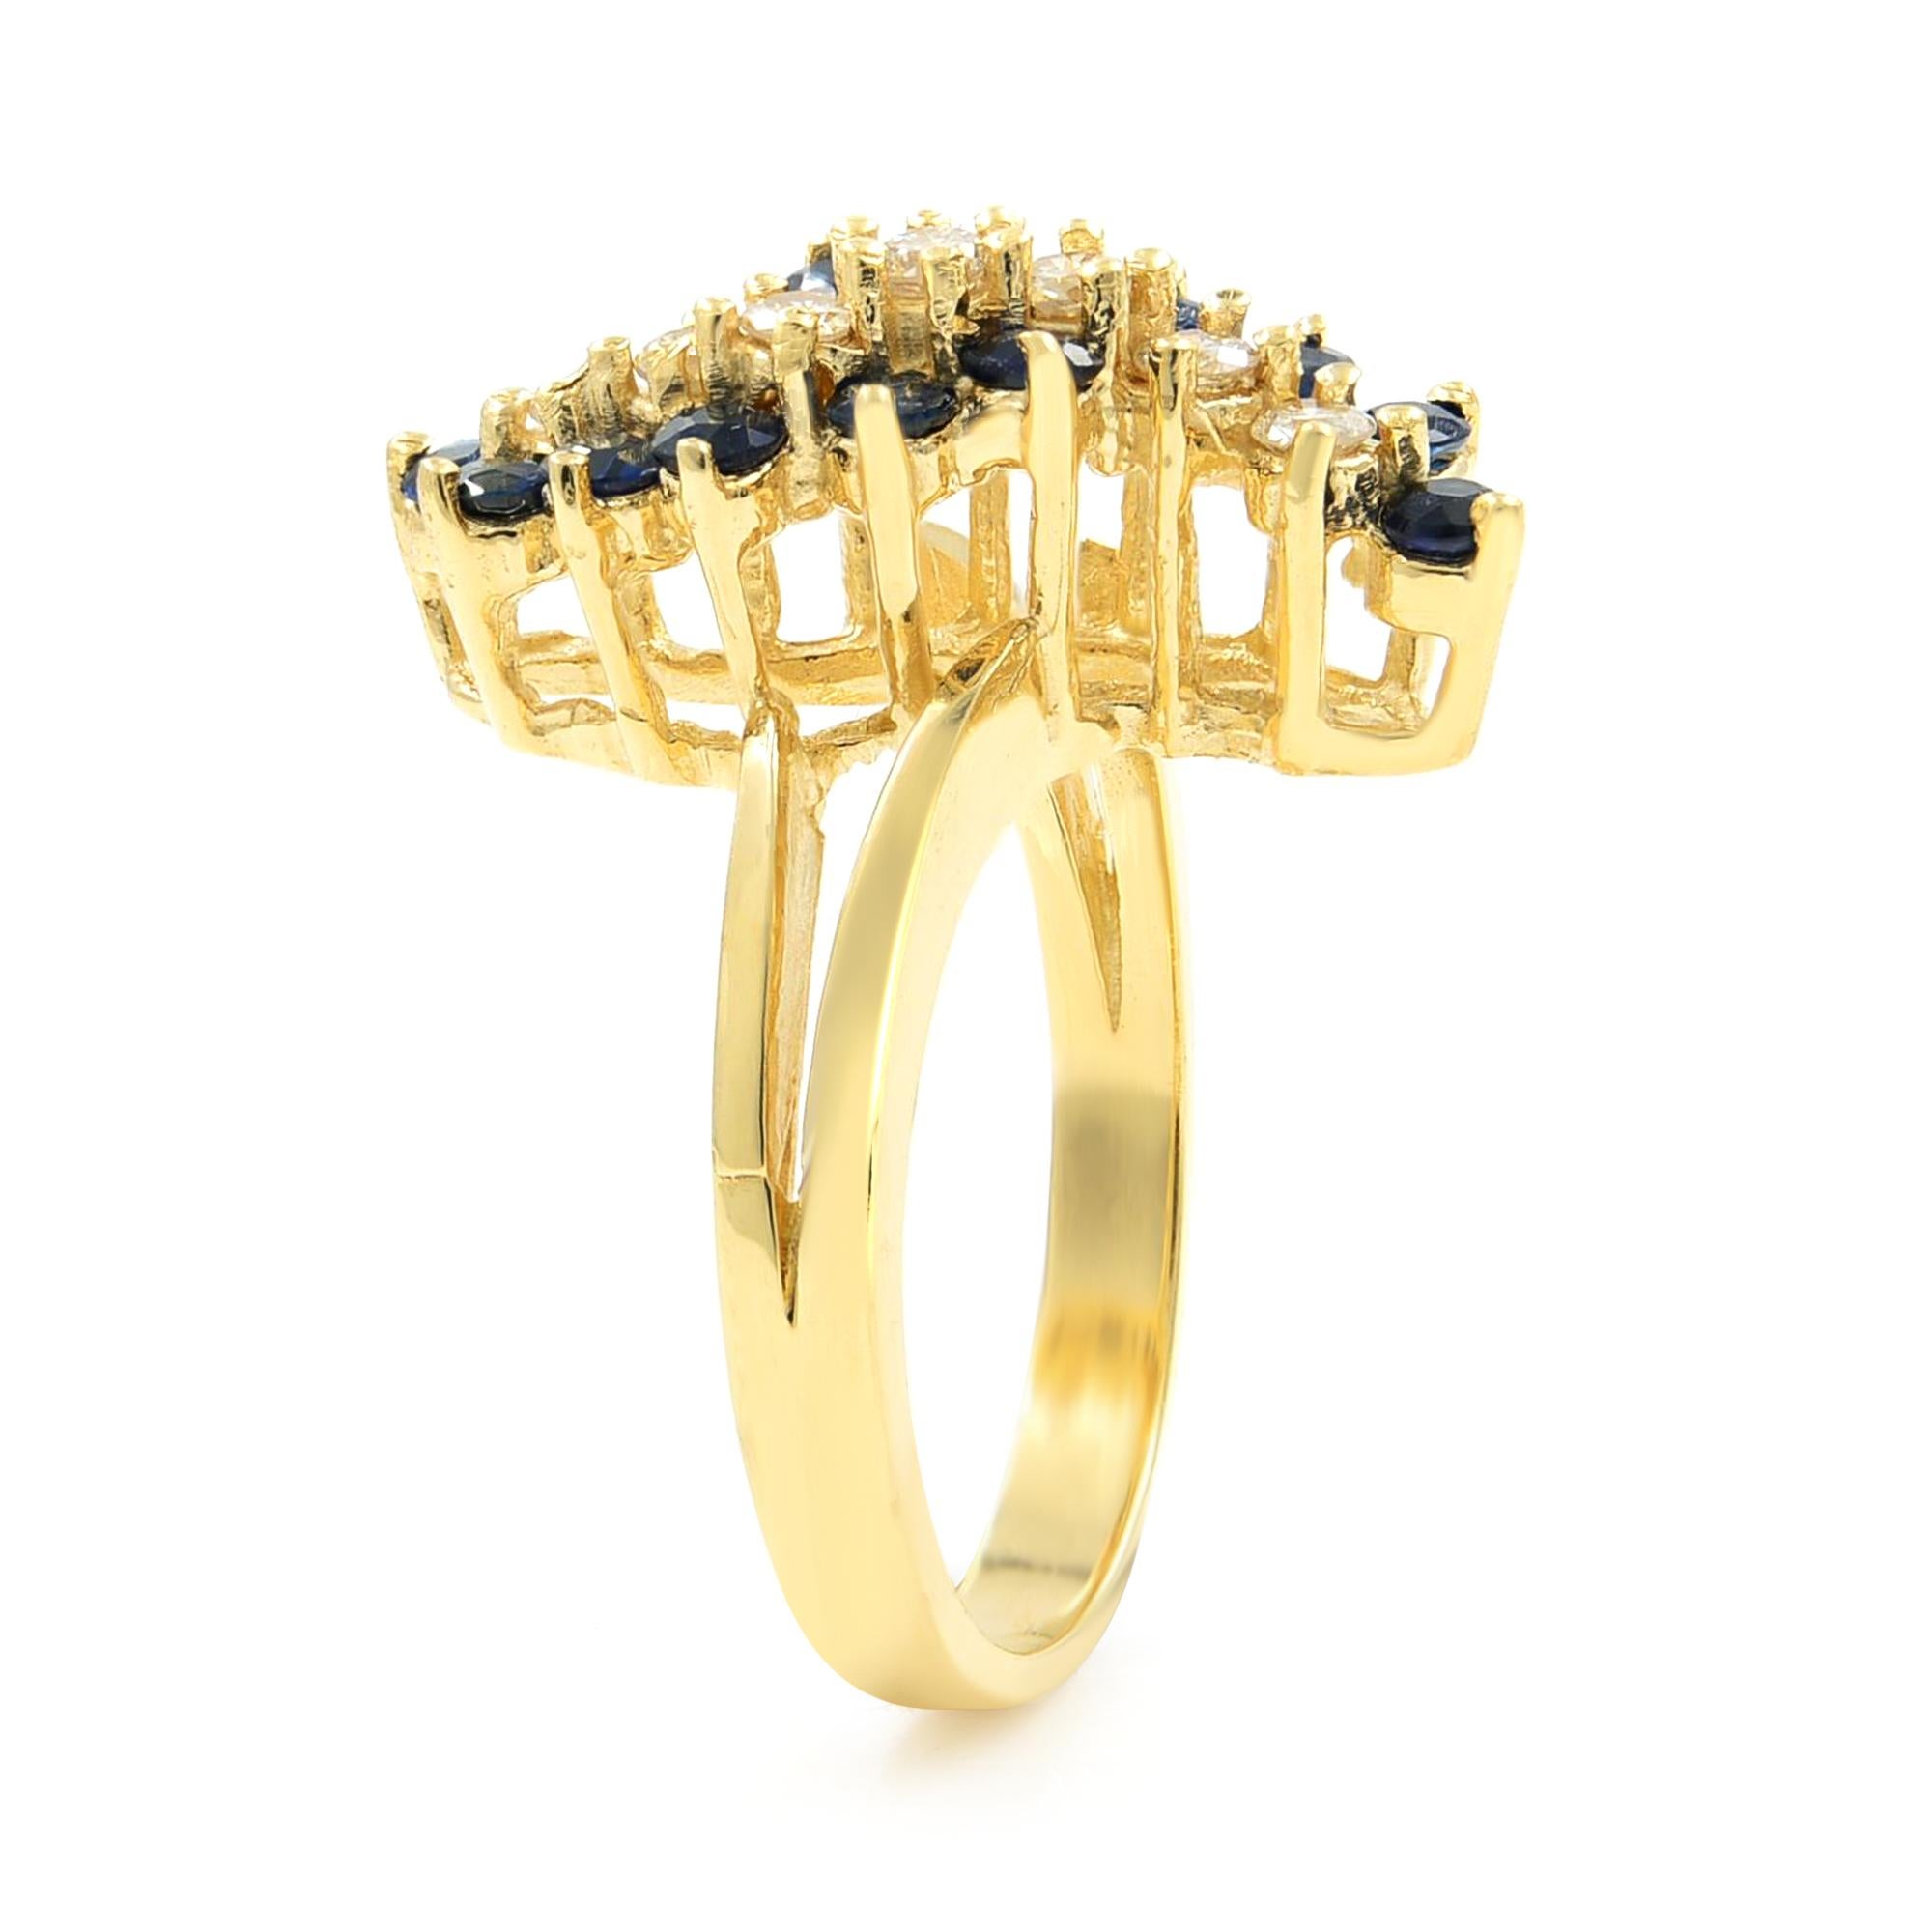 Diamonds and sapphire together weighing .80 carat, join forces to create a fabulous flash in this retro era dazzler hand fabricated in rich 14K yellow gold - circa 1980. Currently ring size 6.
Ring length: 20mm. 
